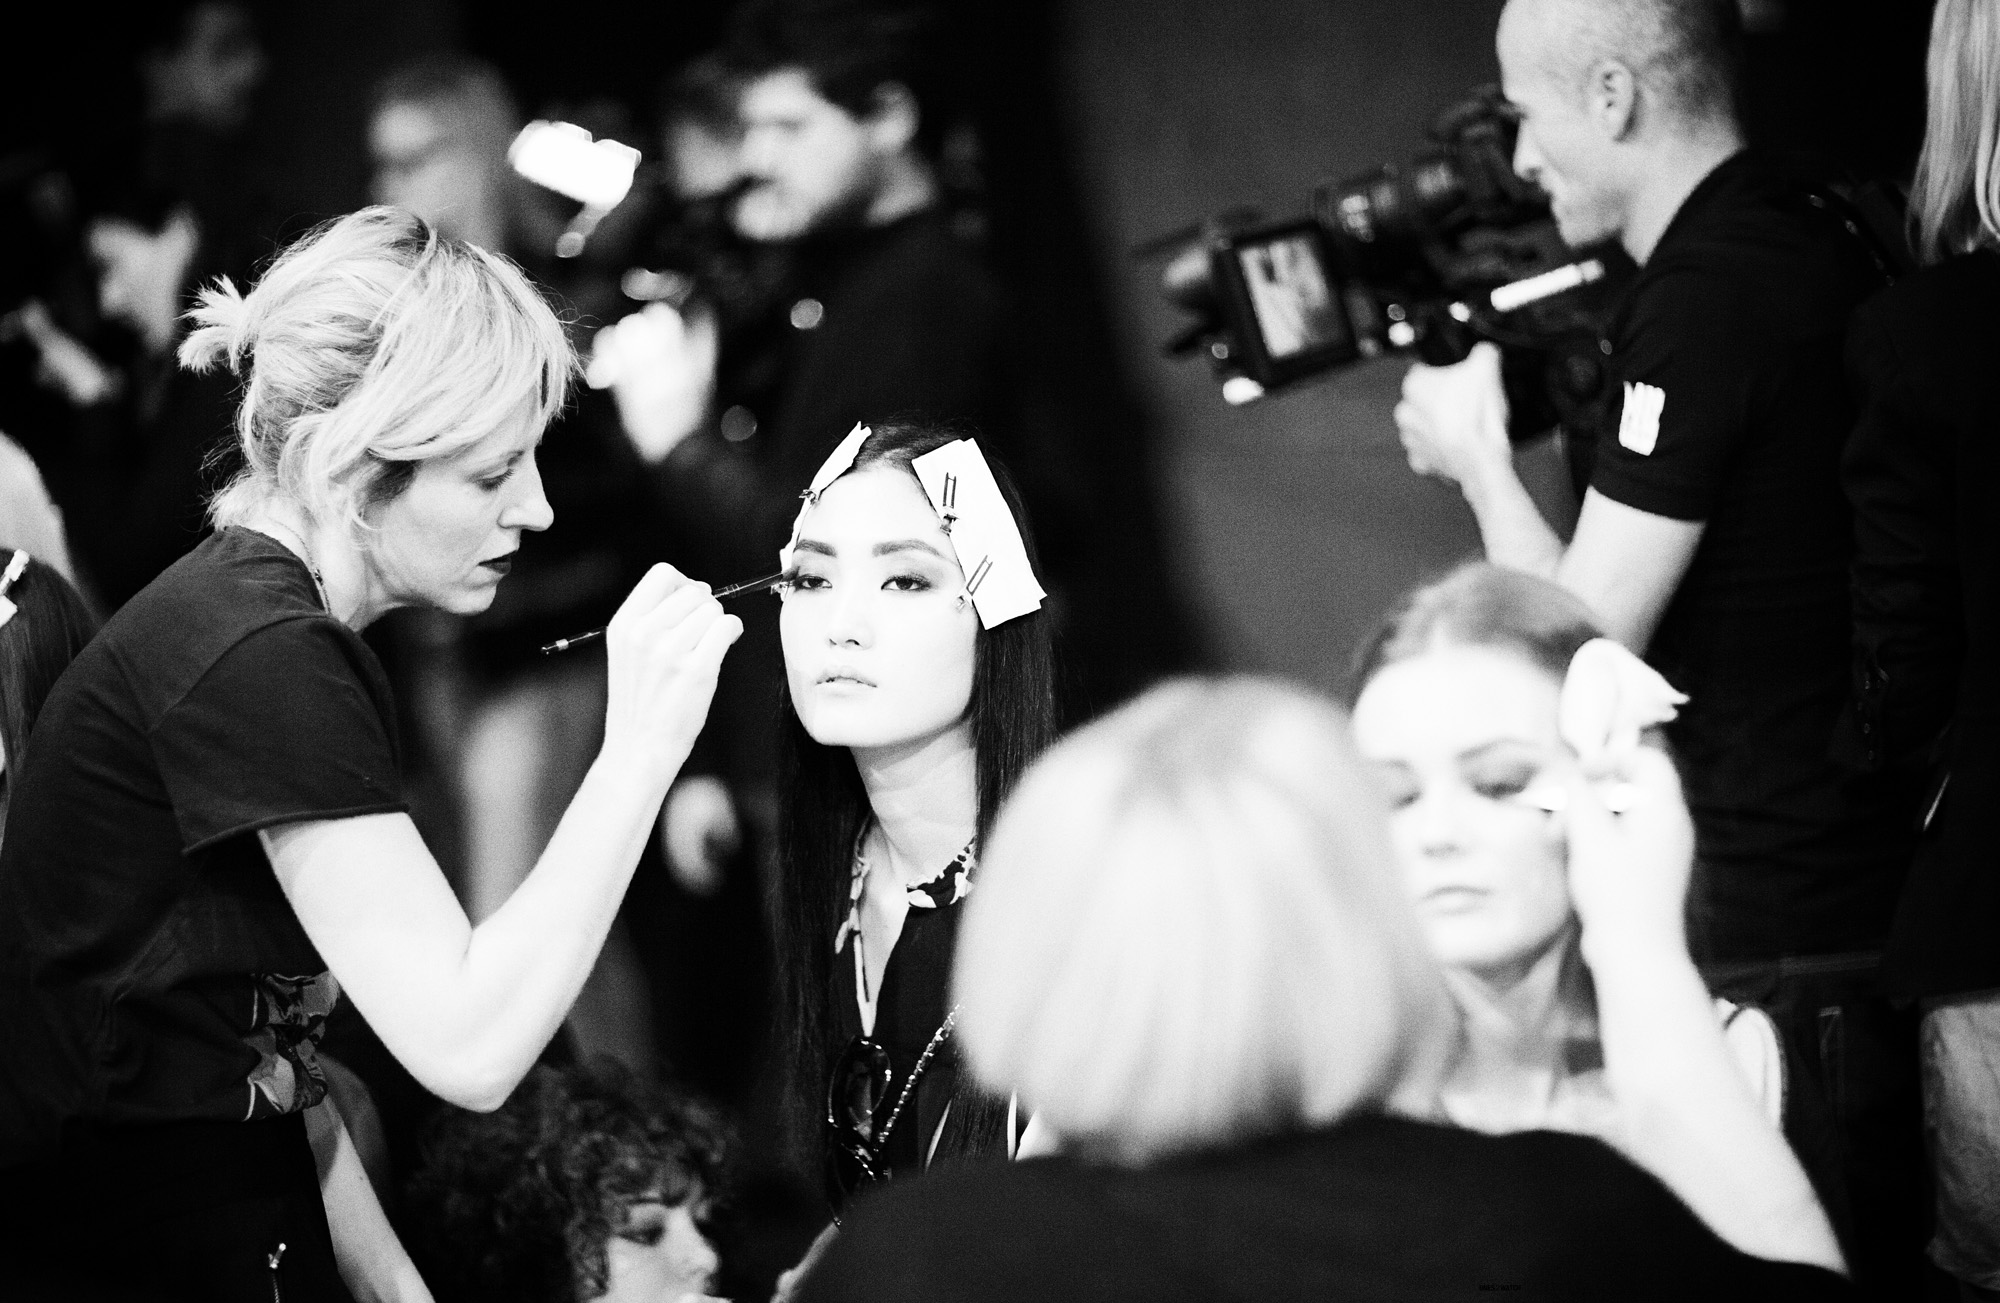 Backstage S/S 13: DSquared2 – the ones 2 watch.